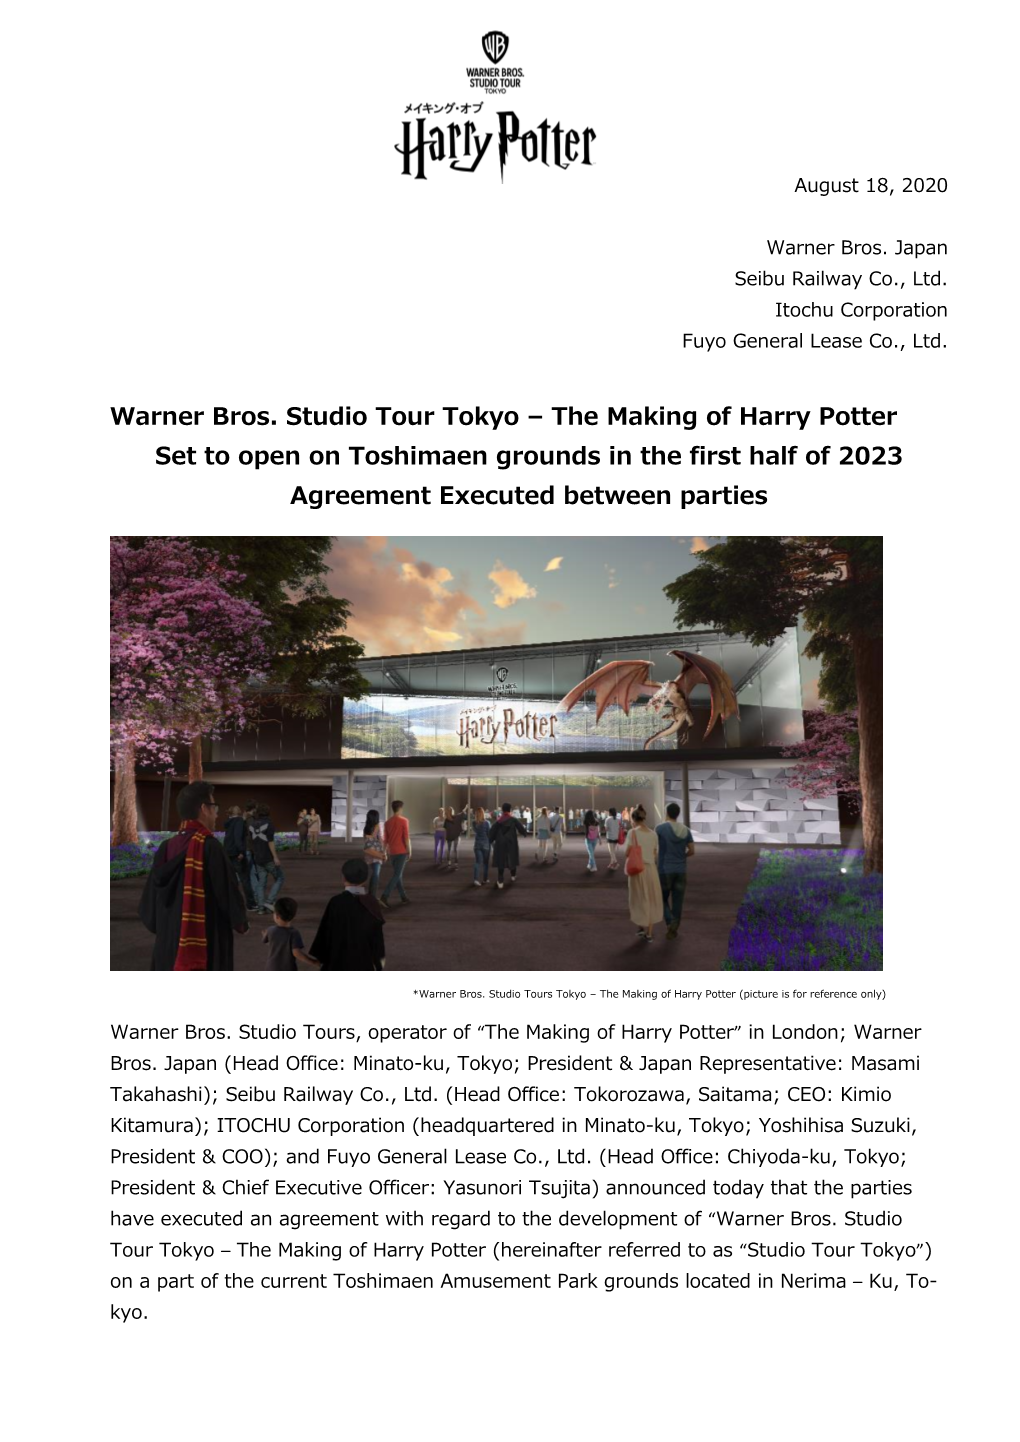 Warner Bros Studio Tour Tokyo The Making Of Harry Potter Set To Open On Toshimaen Grounds In The First Half Of 2023 Agreeme 